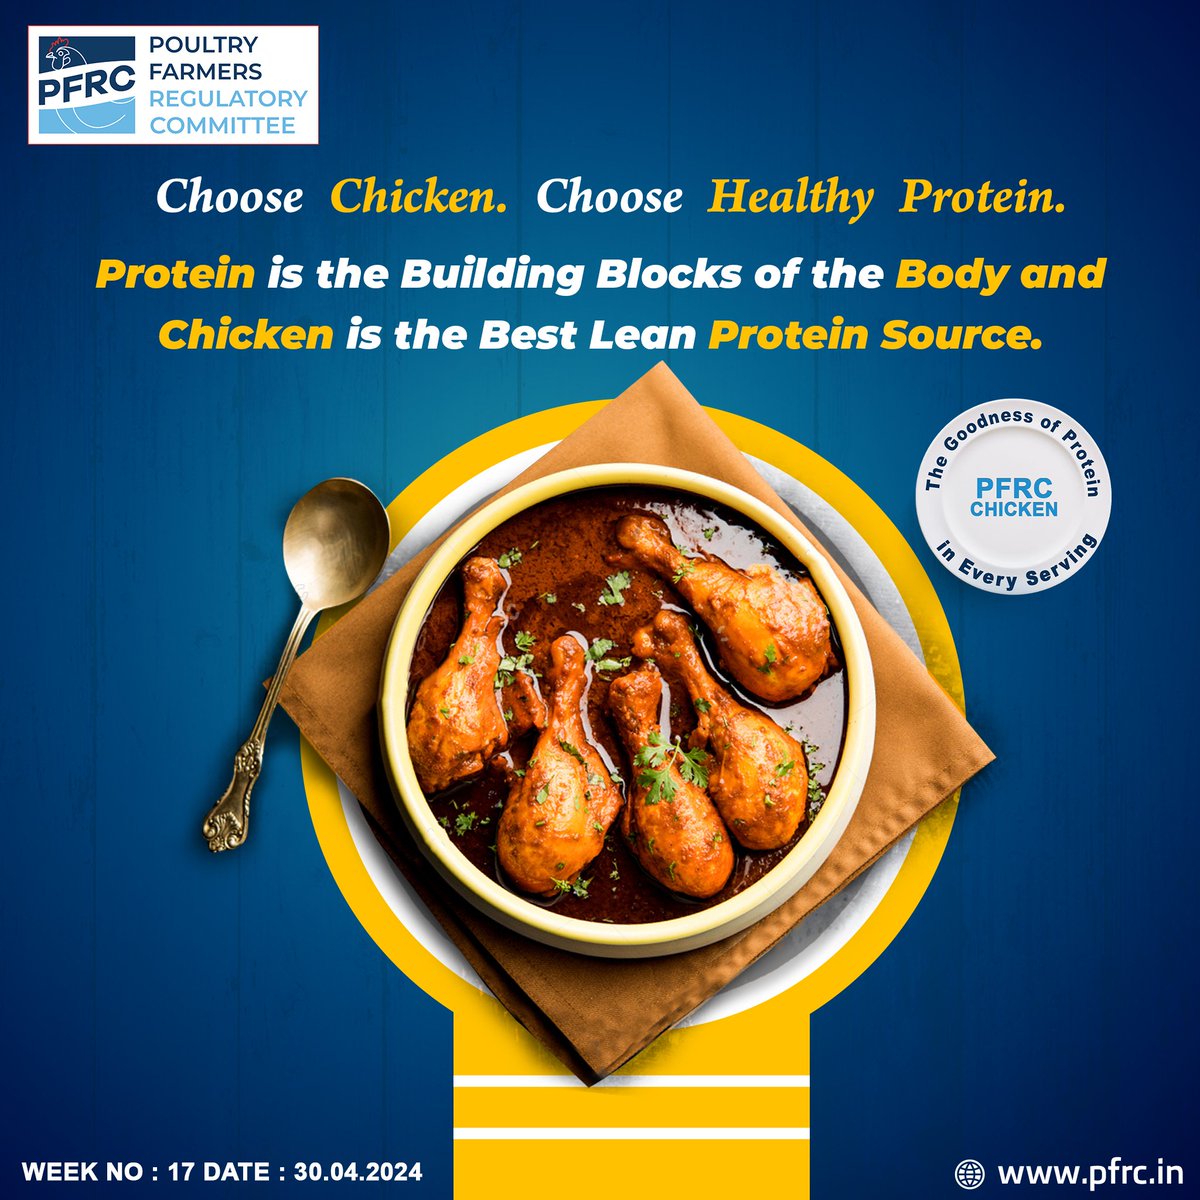 Choose Chicken. Choose Healthy Protein. Protein is the Building Blocks of the Body and Chicken is the Best Lean Protein Source.

#food #protein #health #eyesight #vitamin #immunity #yummy #diet #dinner #foodie #chicken #homemade  #healthyfood  #poultryfood #pfrc #pfrctn